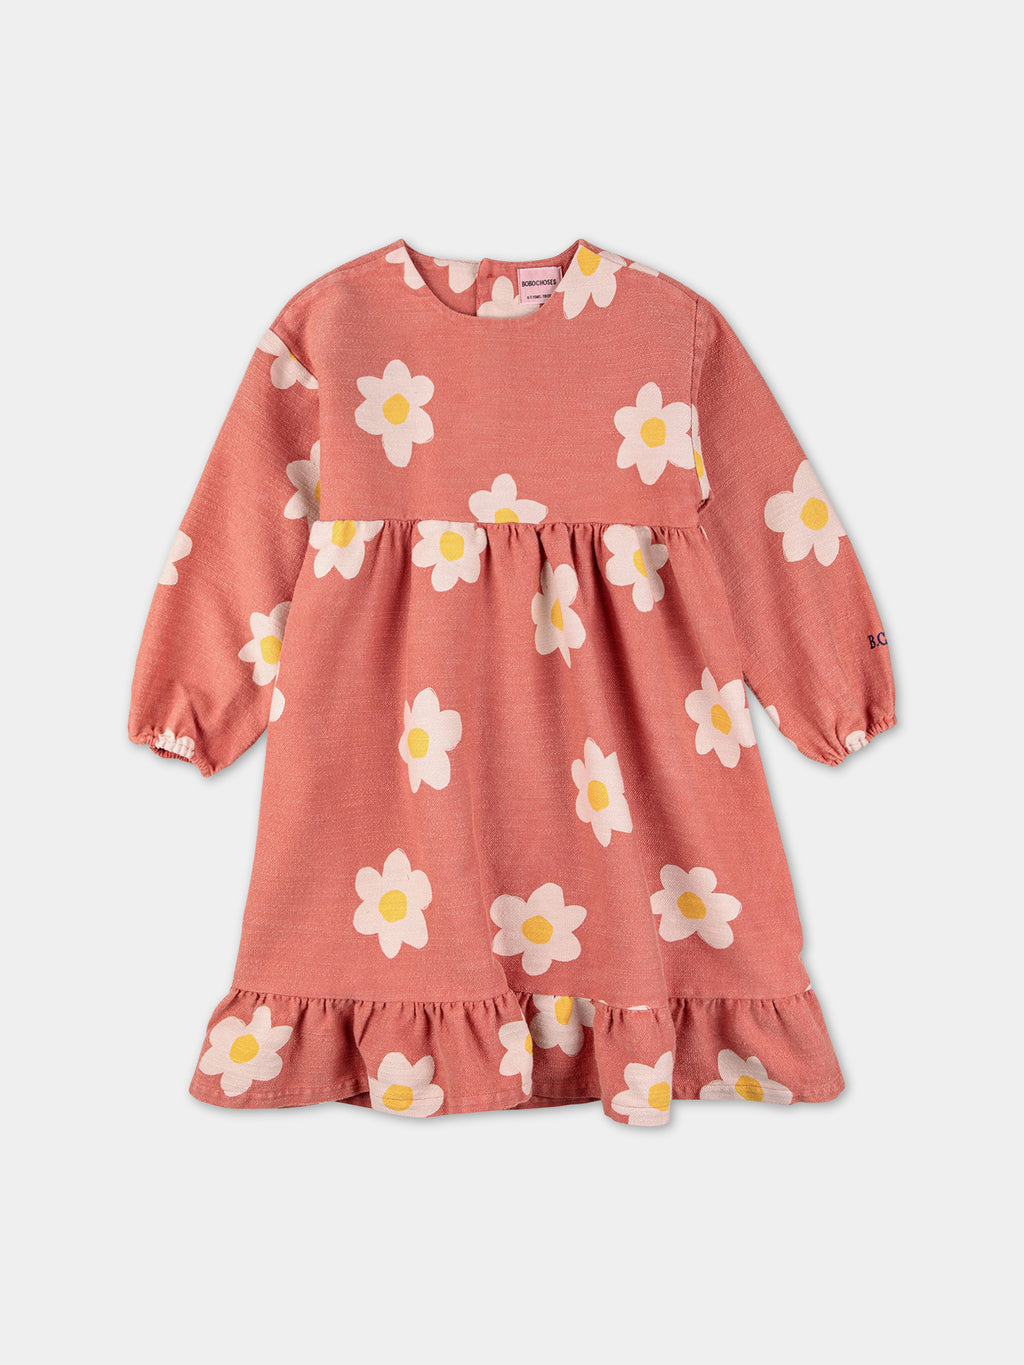 Pink dress for girl with daisies